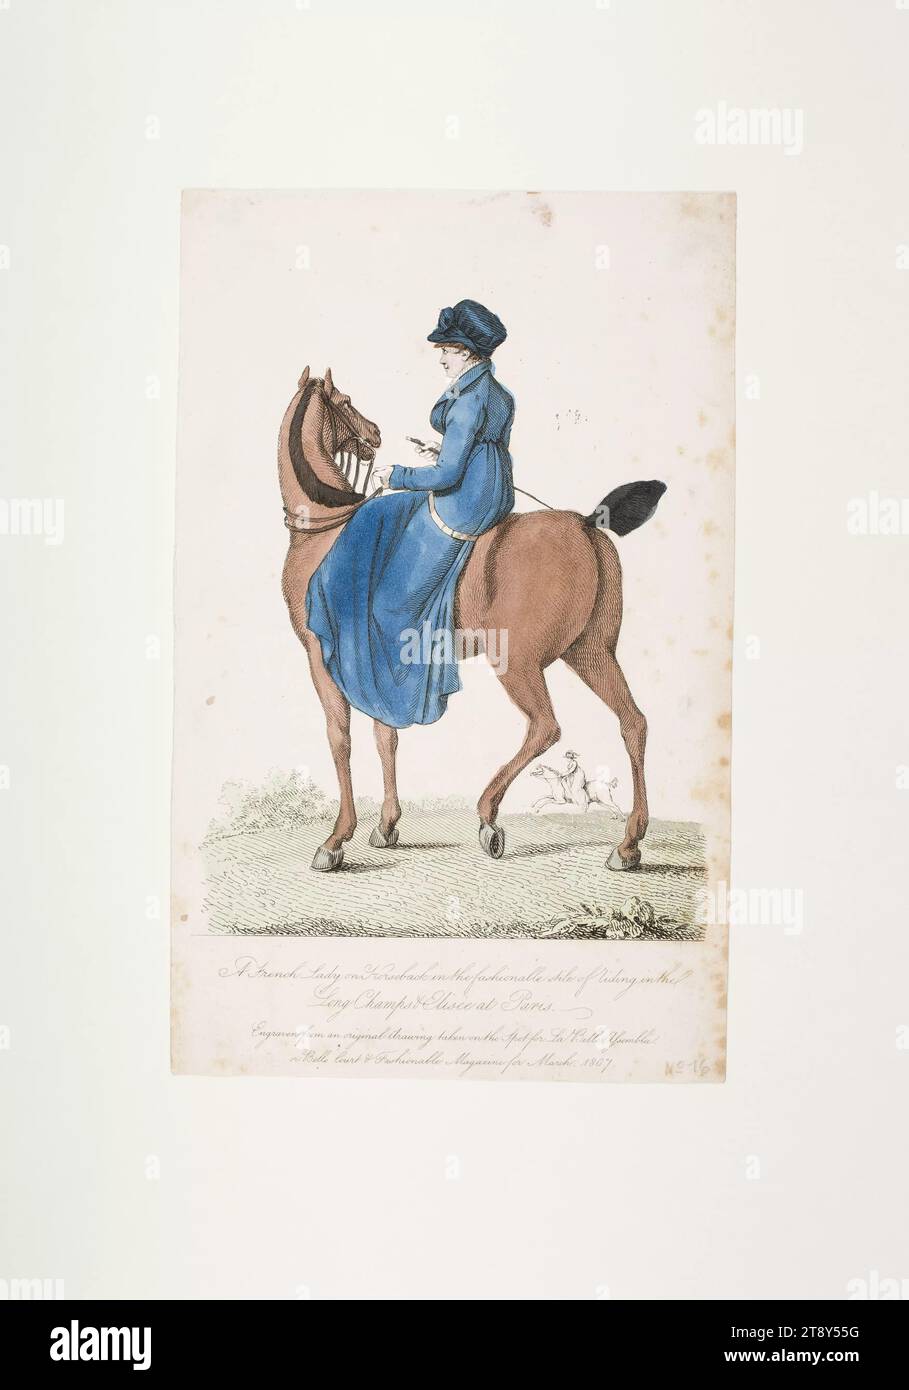 Fashion image: A figure, riding dress (Long Champs Elisee), Unknown, 1807, paper, colored, copperplate engraving, plate size 23, 1×14, 5 cm, fashion, bourgeoisie, animals, fashion plates, headgear, horse, woman, dress, robe, The Vienna Collection Stock Photo